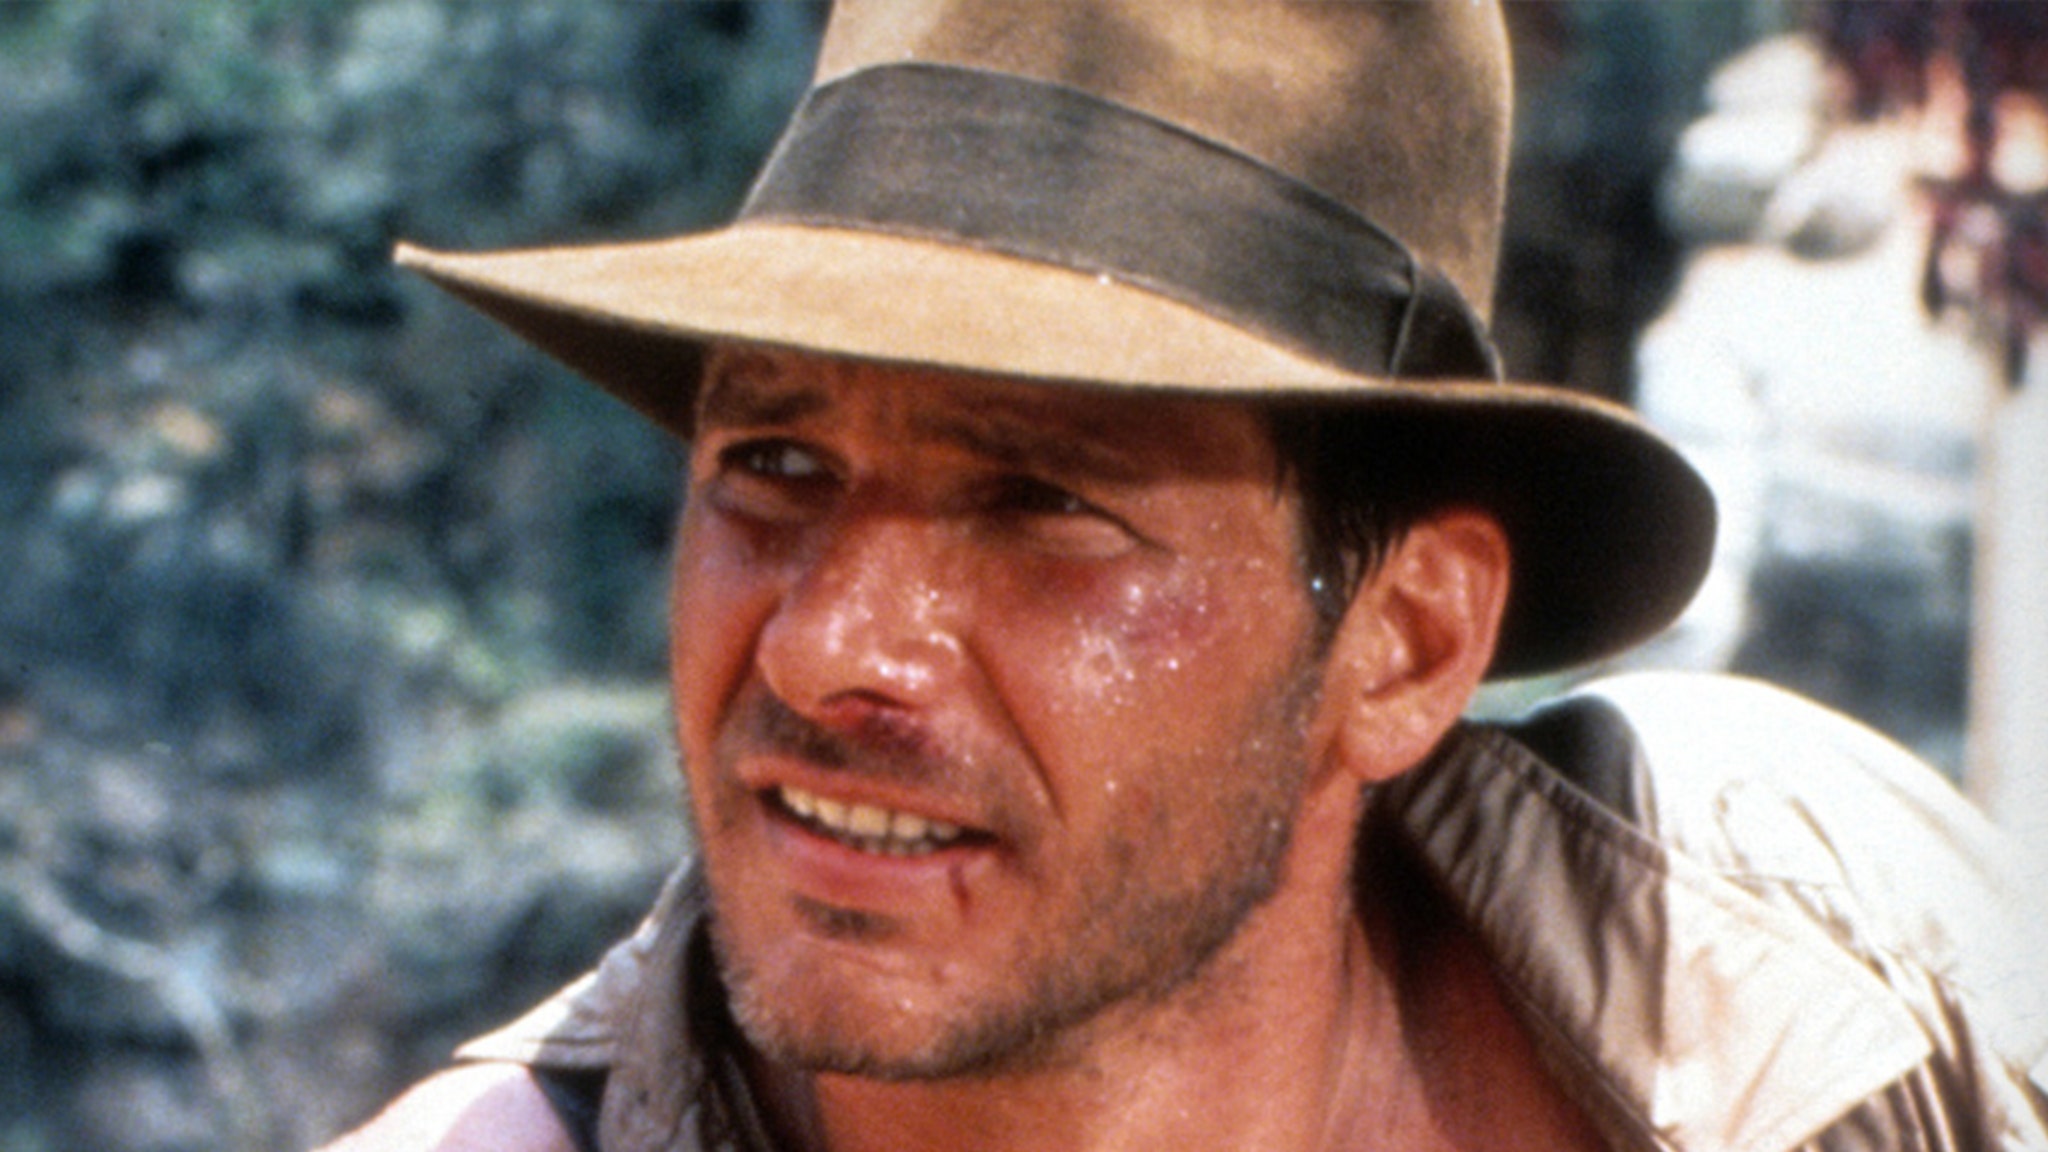 The new Indiana Jones movie limped off the box office